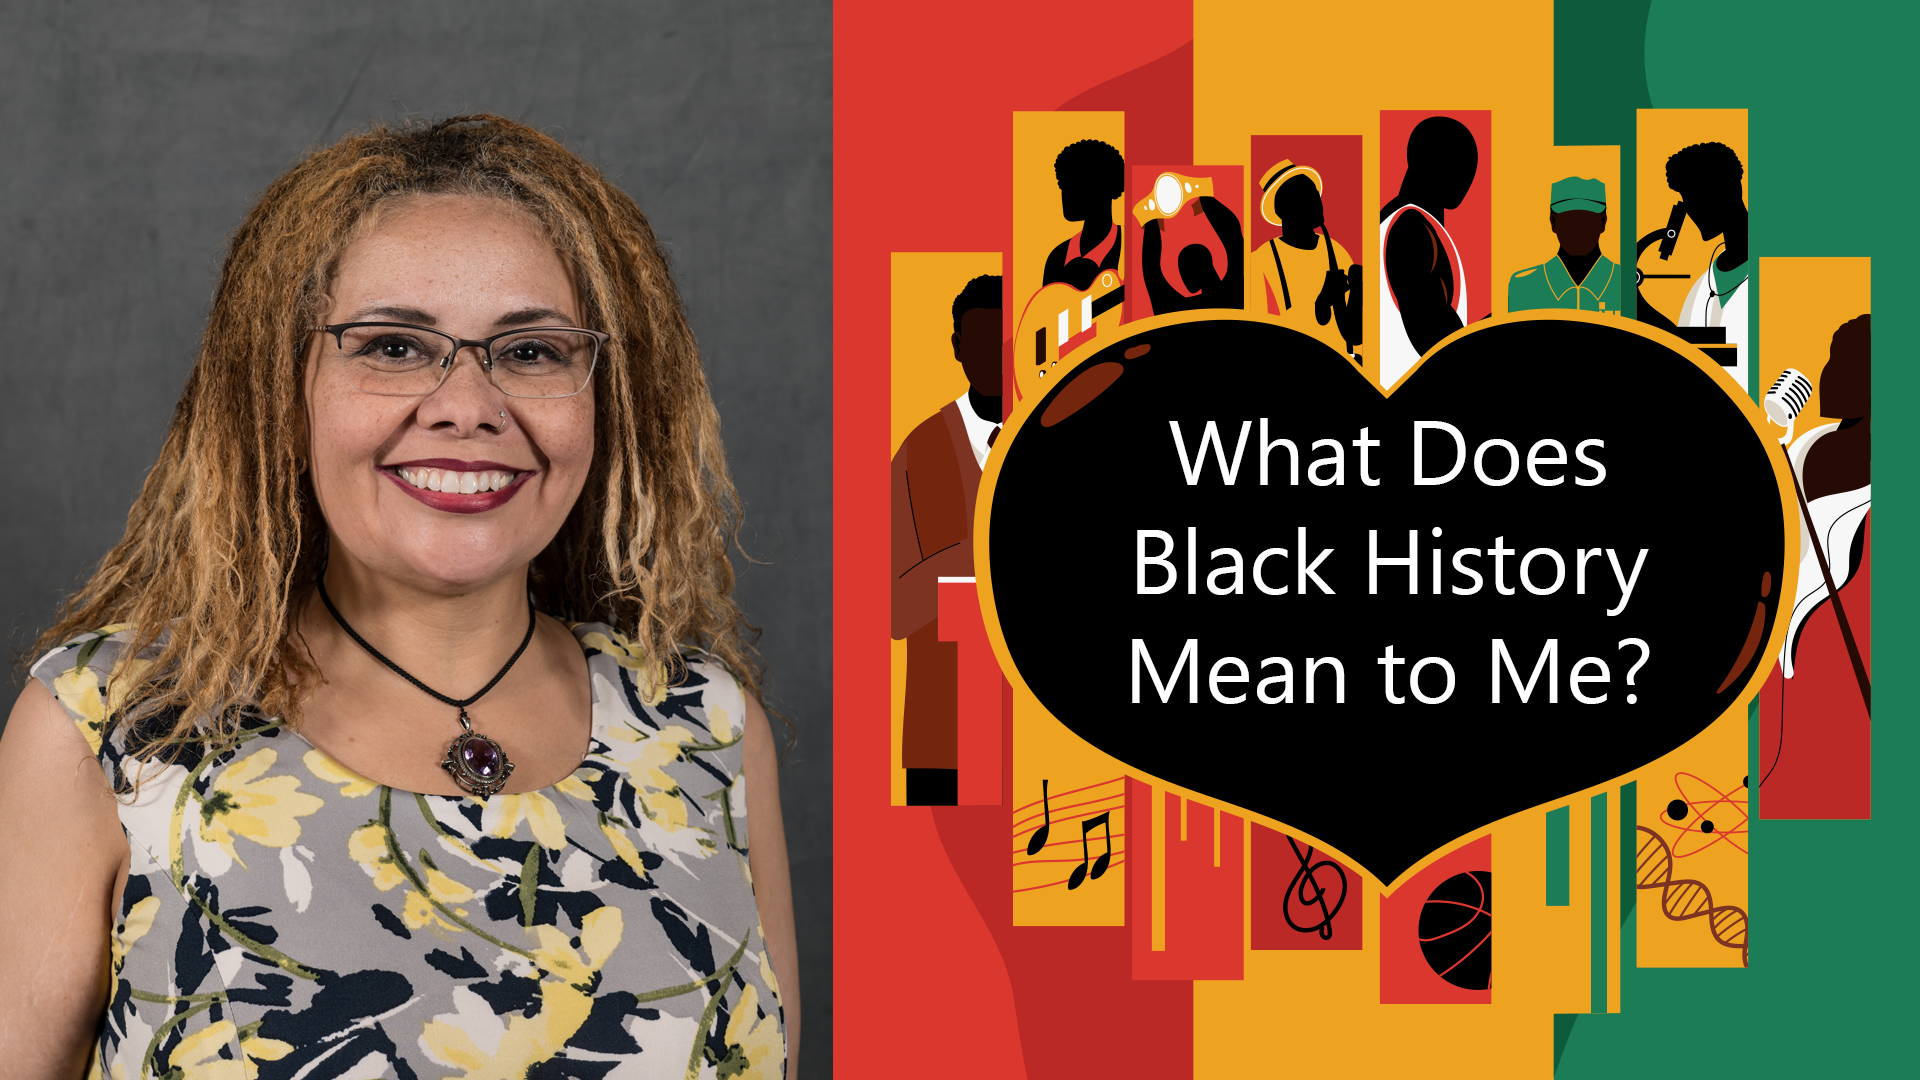 What Does Black History Mean to Me?